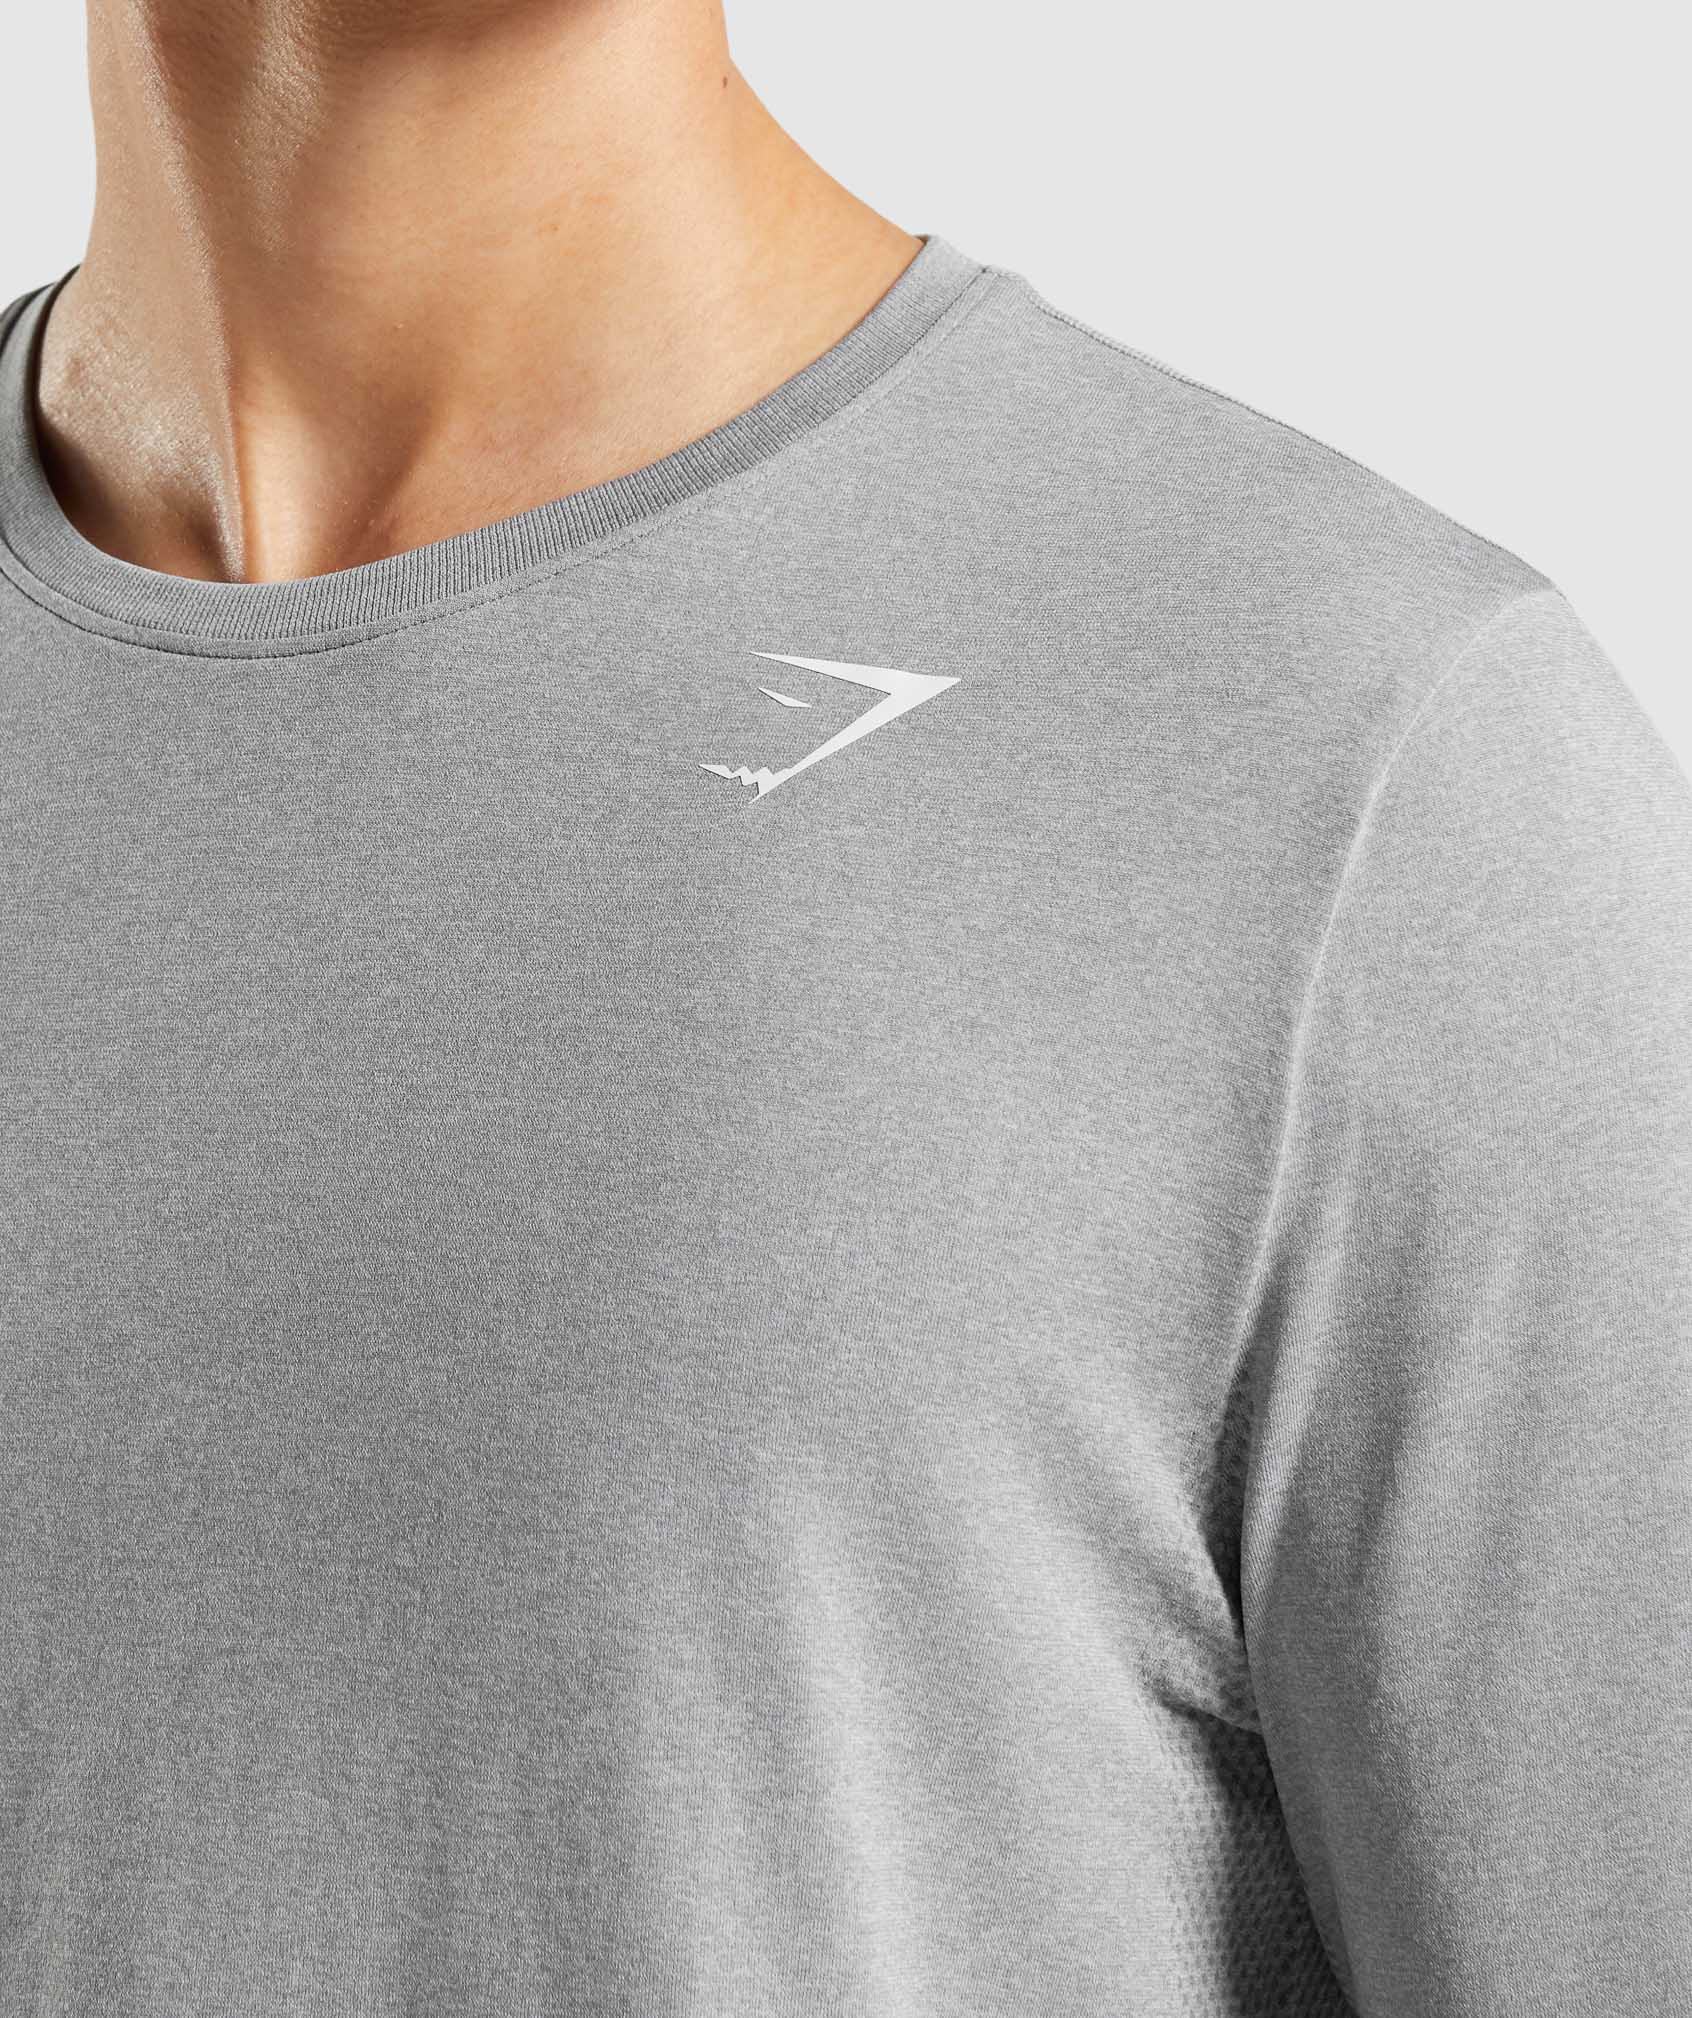 Arrival Seamless Long Sleeve T-Shirt in Grey - view 5